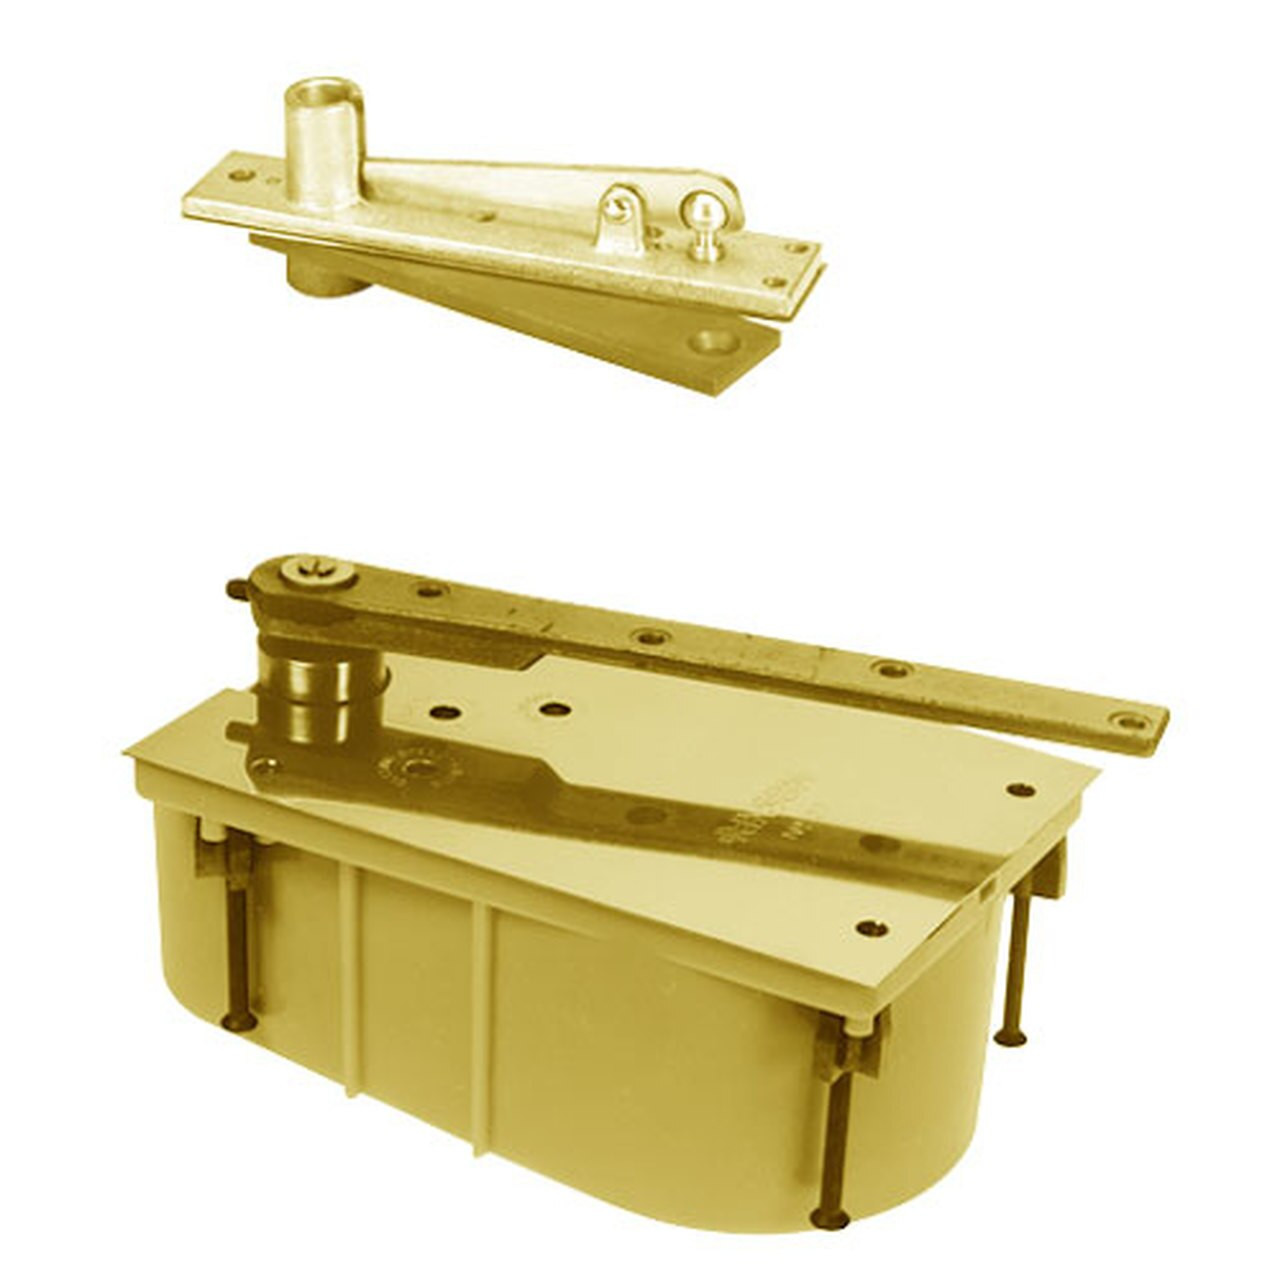 28-105N-554-LCC-LH-605 Rixson 28 Series Heavy Duty Single Acting Center Hung Floor Closer with Concealed Arm in Bright Brass Finish